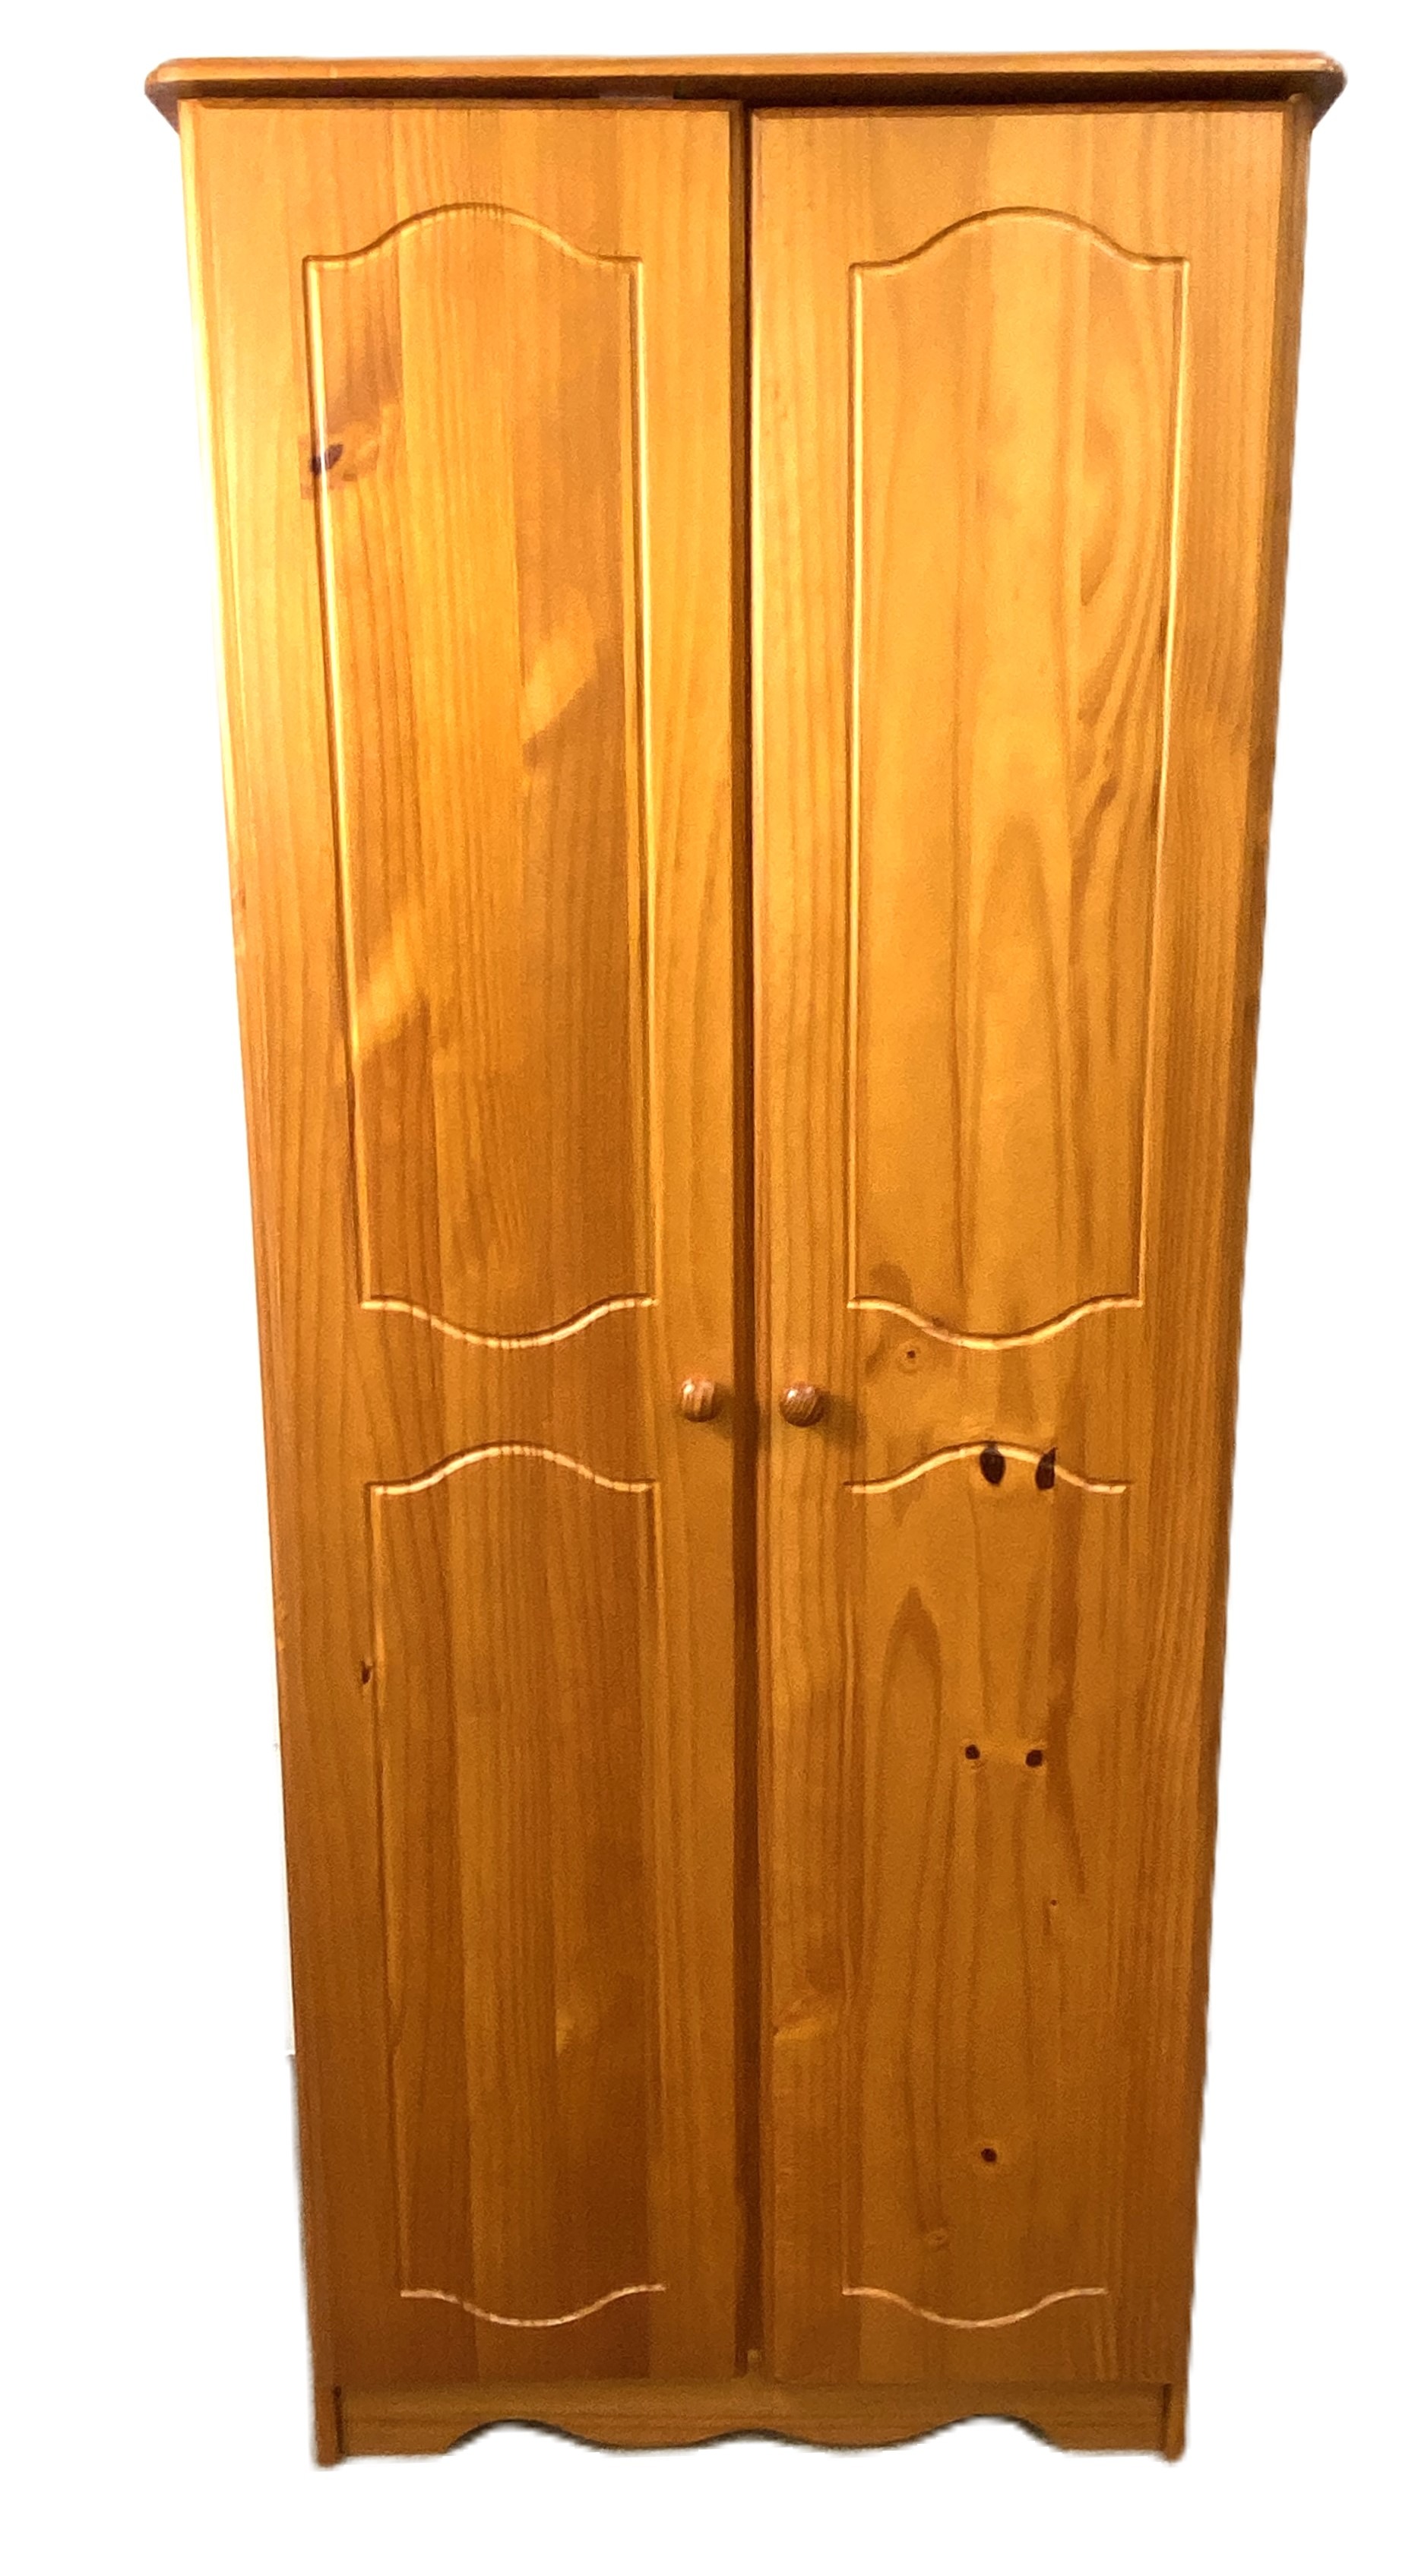 Two modern pine veneered wardrobes, both with two panelled doors, 180cm high (2) - Image 4 of 6